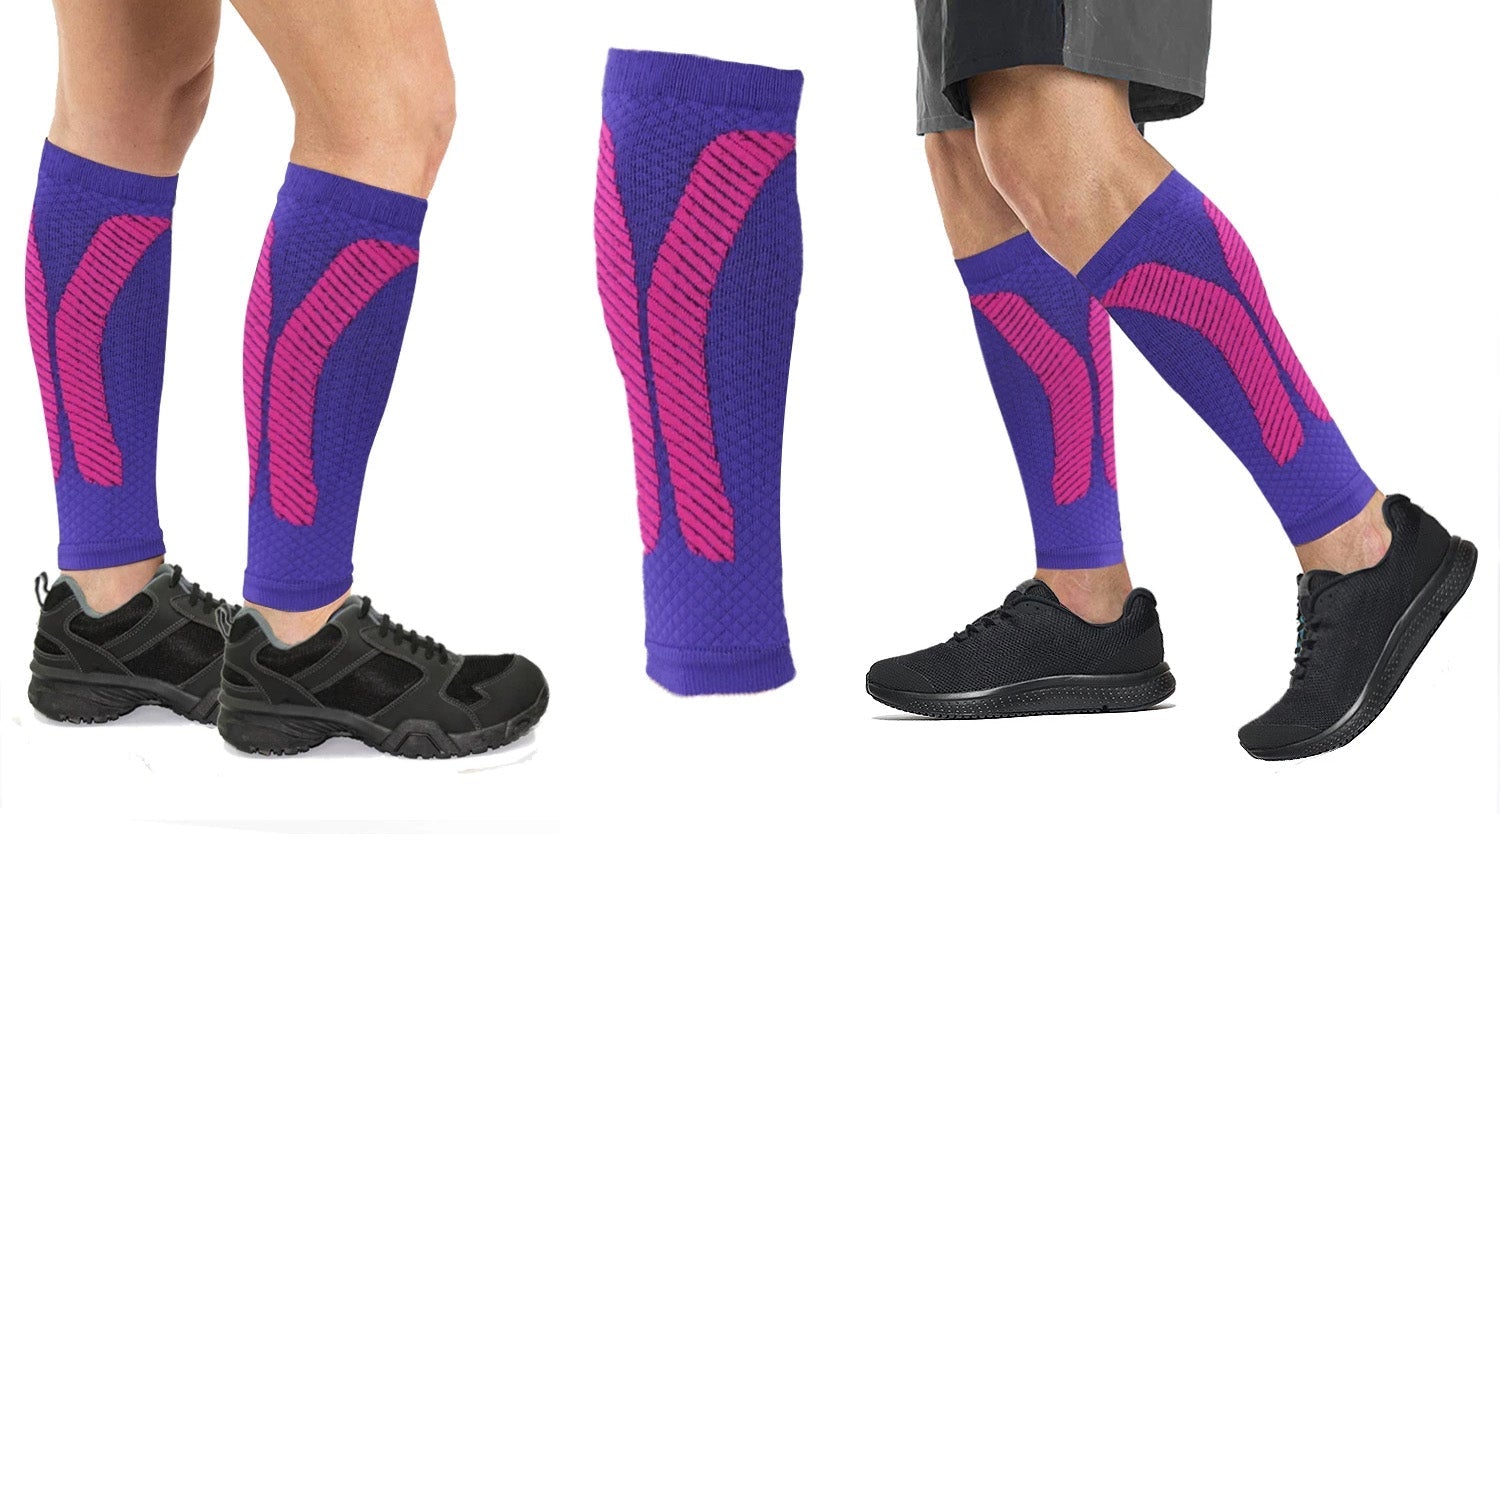 Women's Calf Sleeves – Extreme Fit